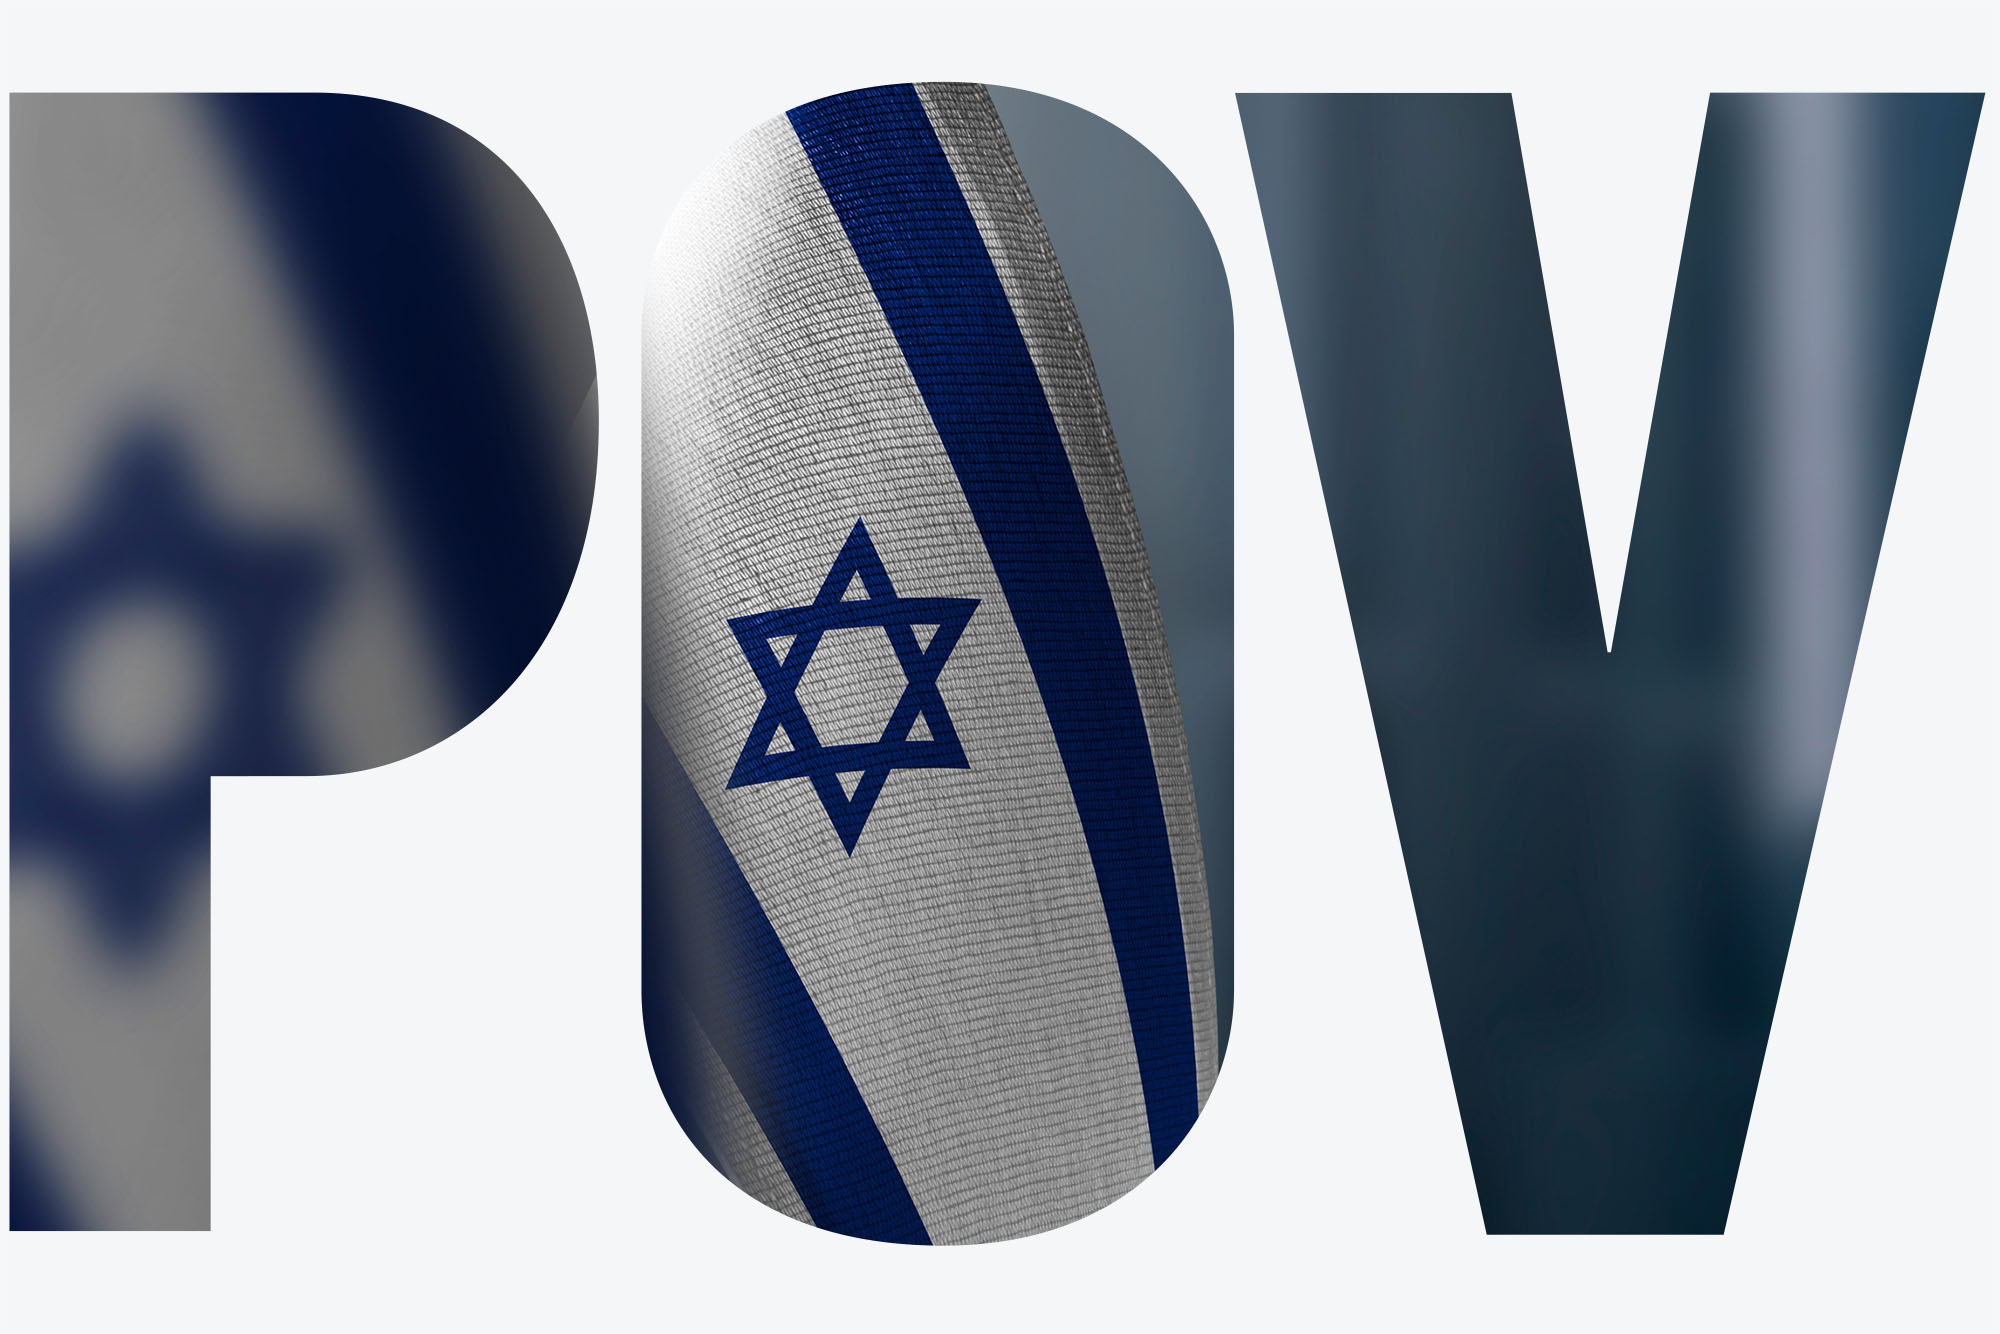 Photo: Small flags of Israel are displayed in front of a blurry background of a city. Image is seen through transparent letters that read "POV" on a white overlay.